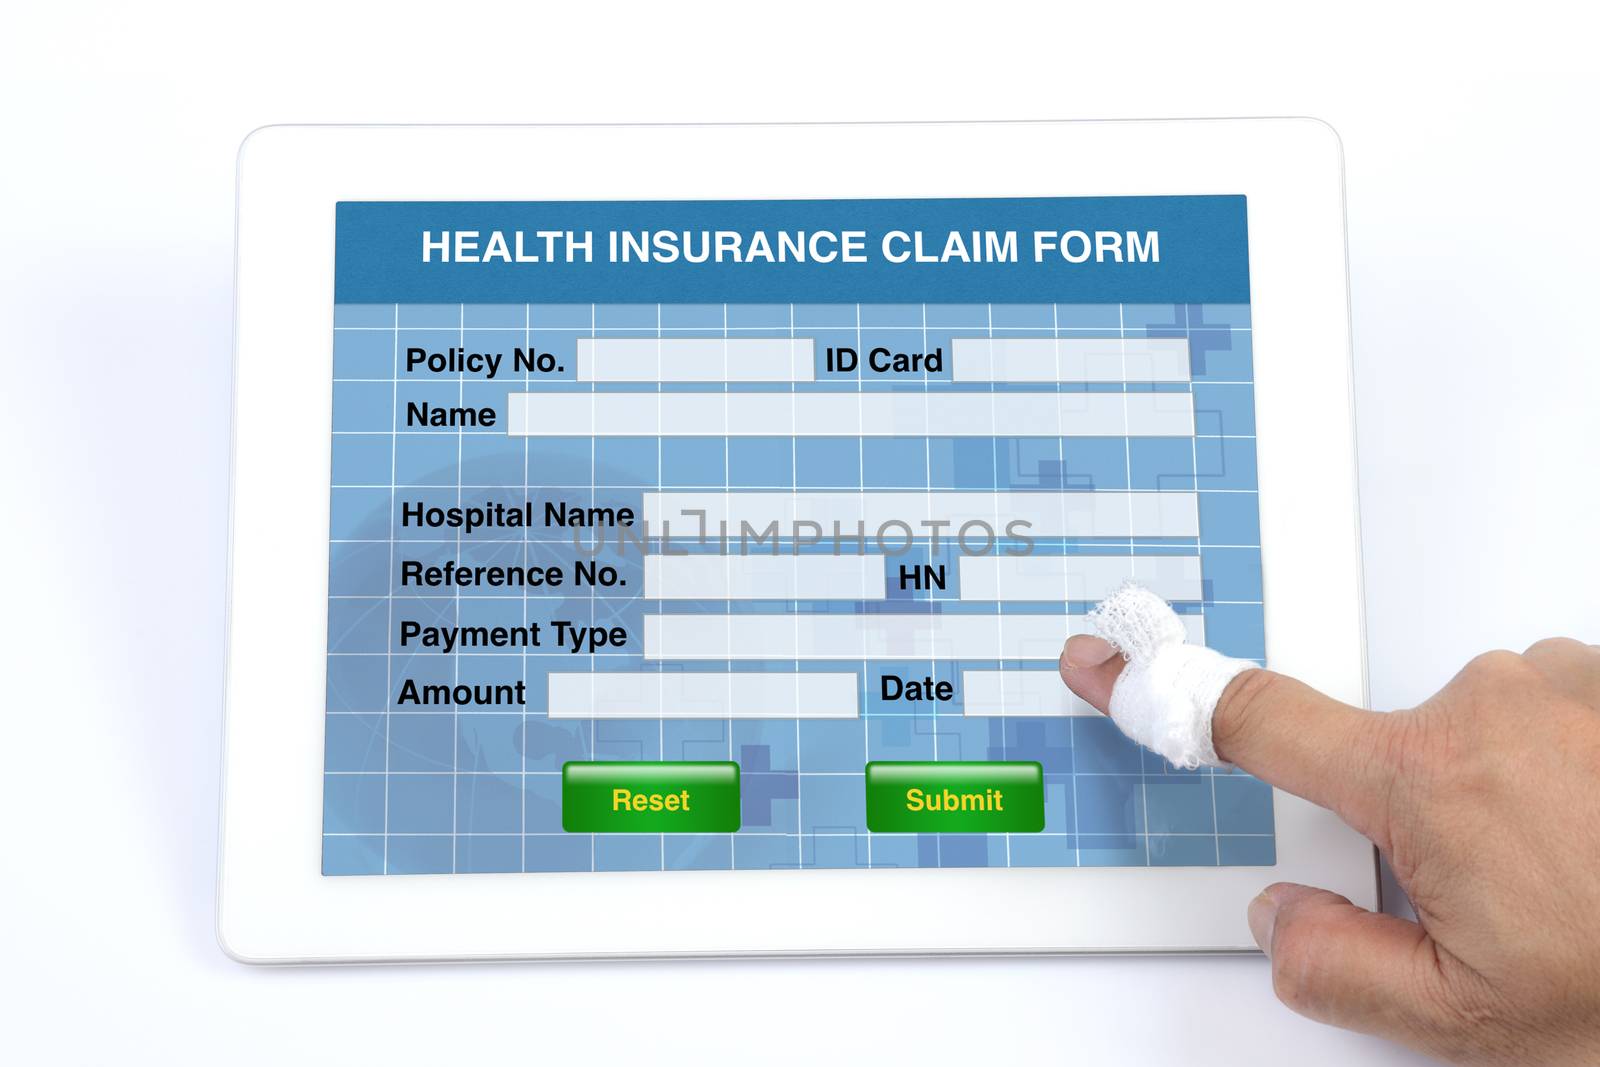 Someone using tablet to complete health insurance claim form on white background.